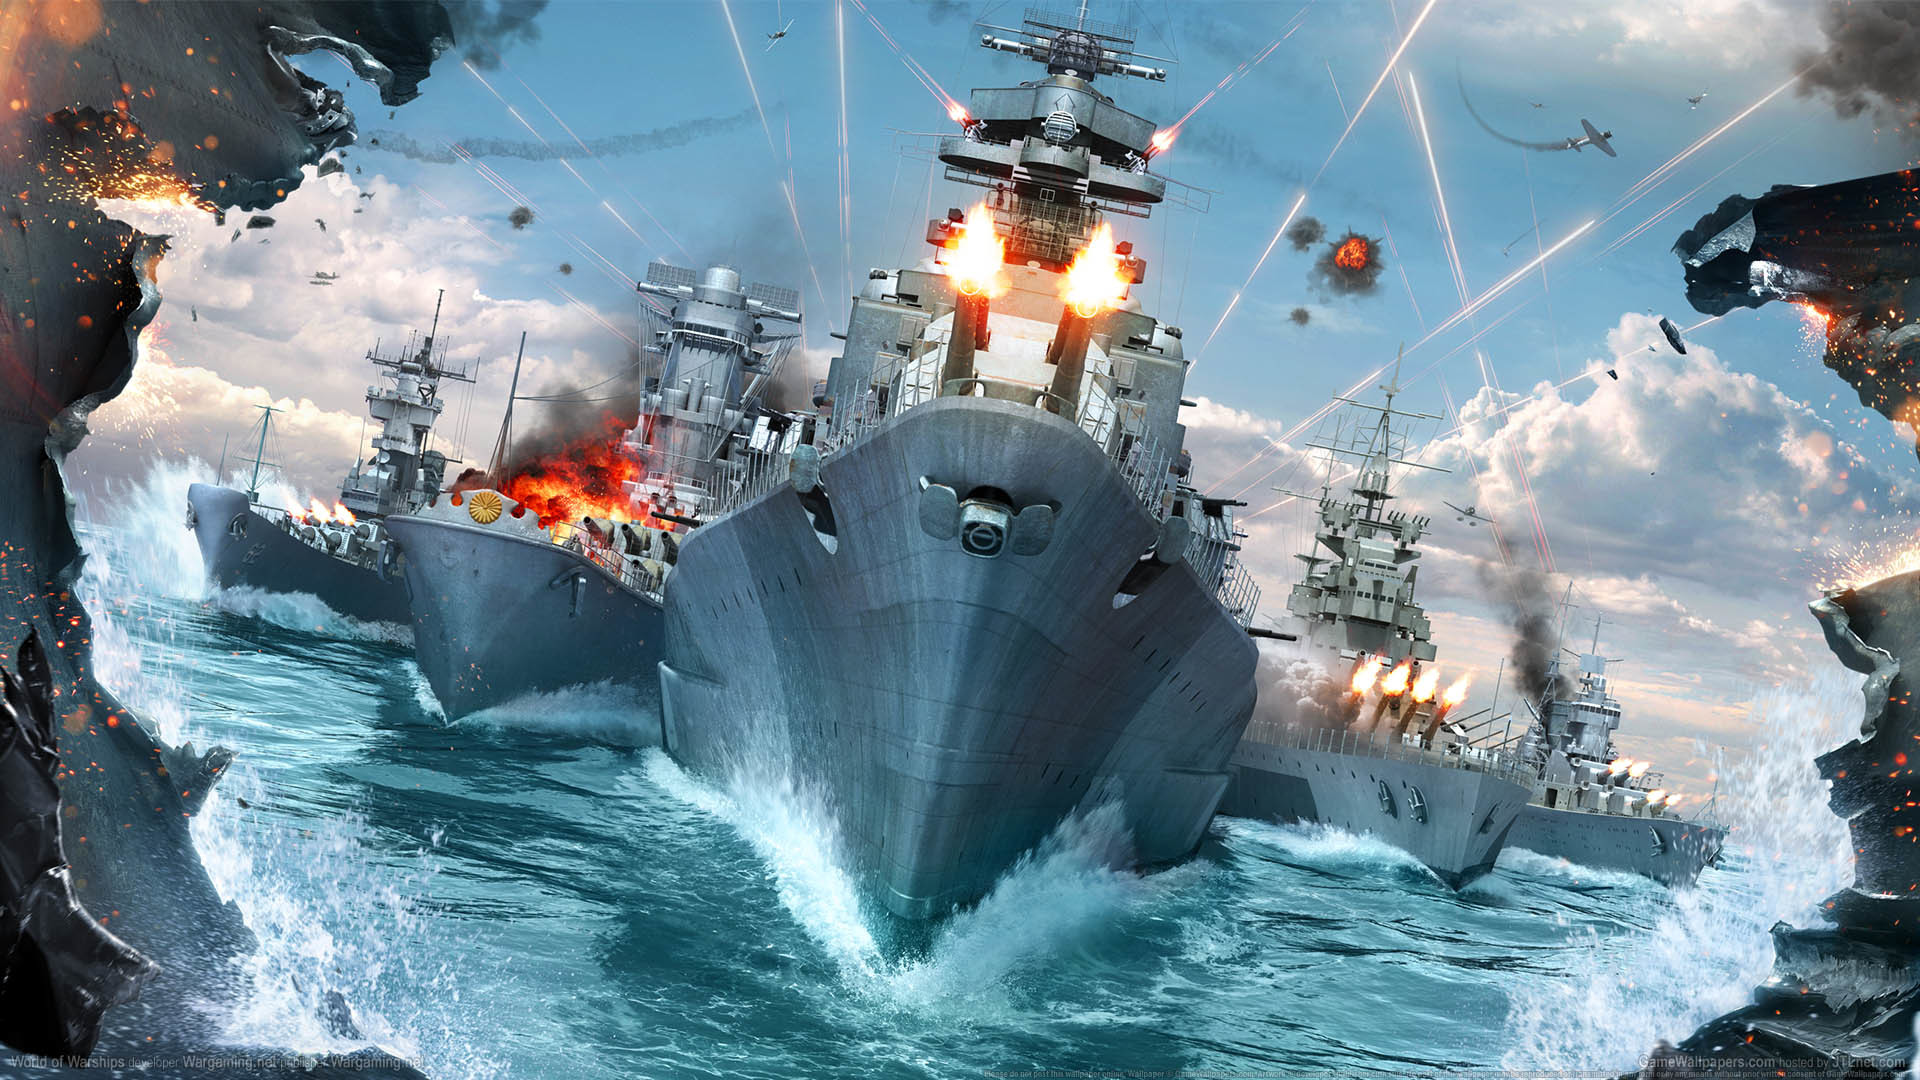 1920x1080 World of Warships wallpaper or background World of Warships wallpaper or  background 01